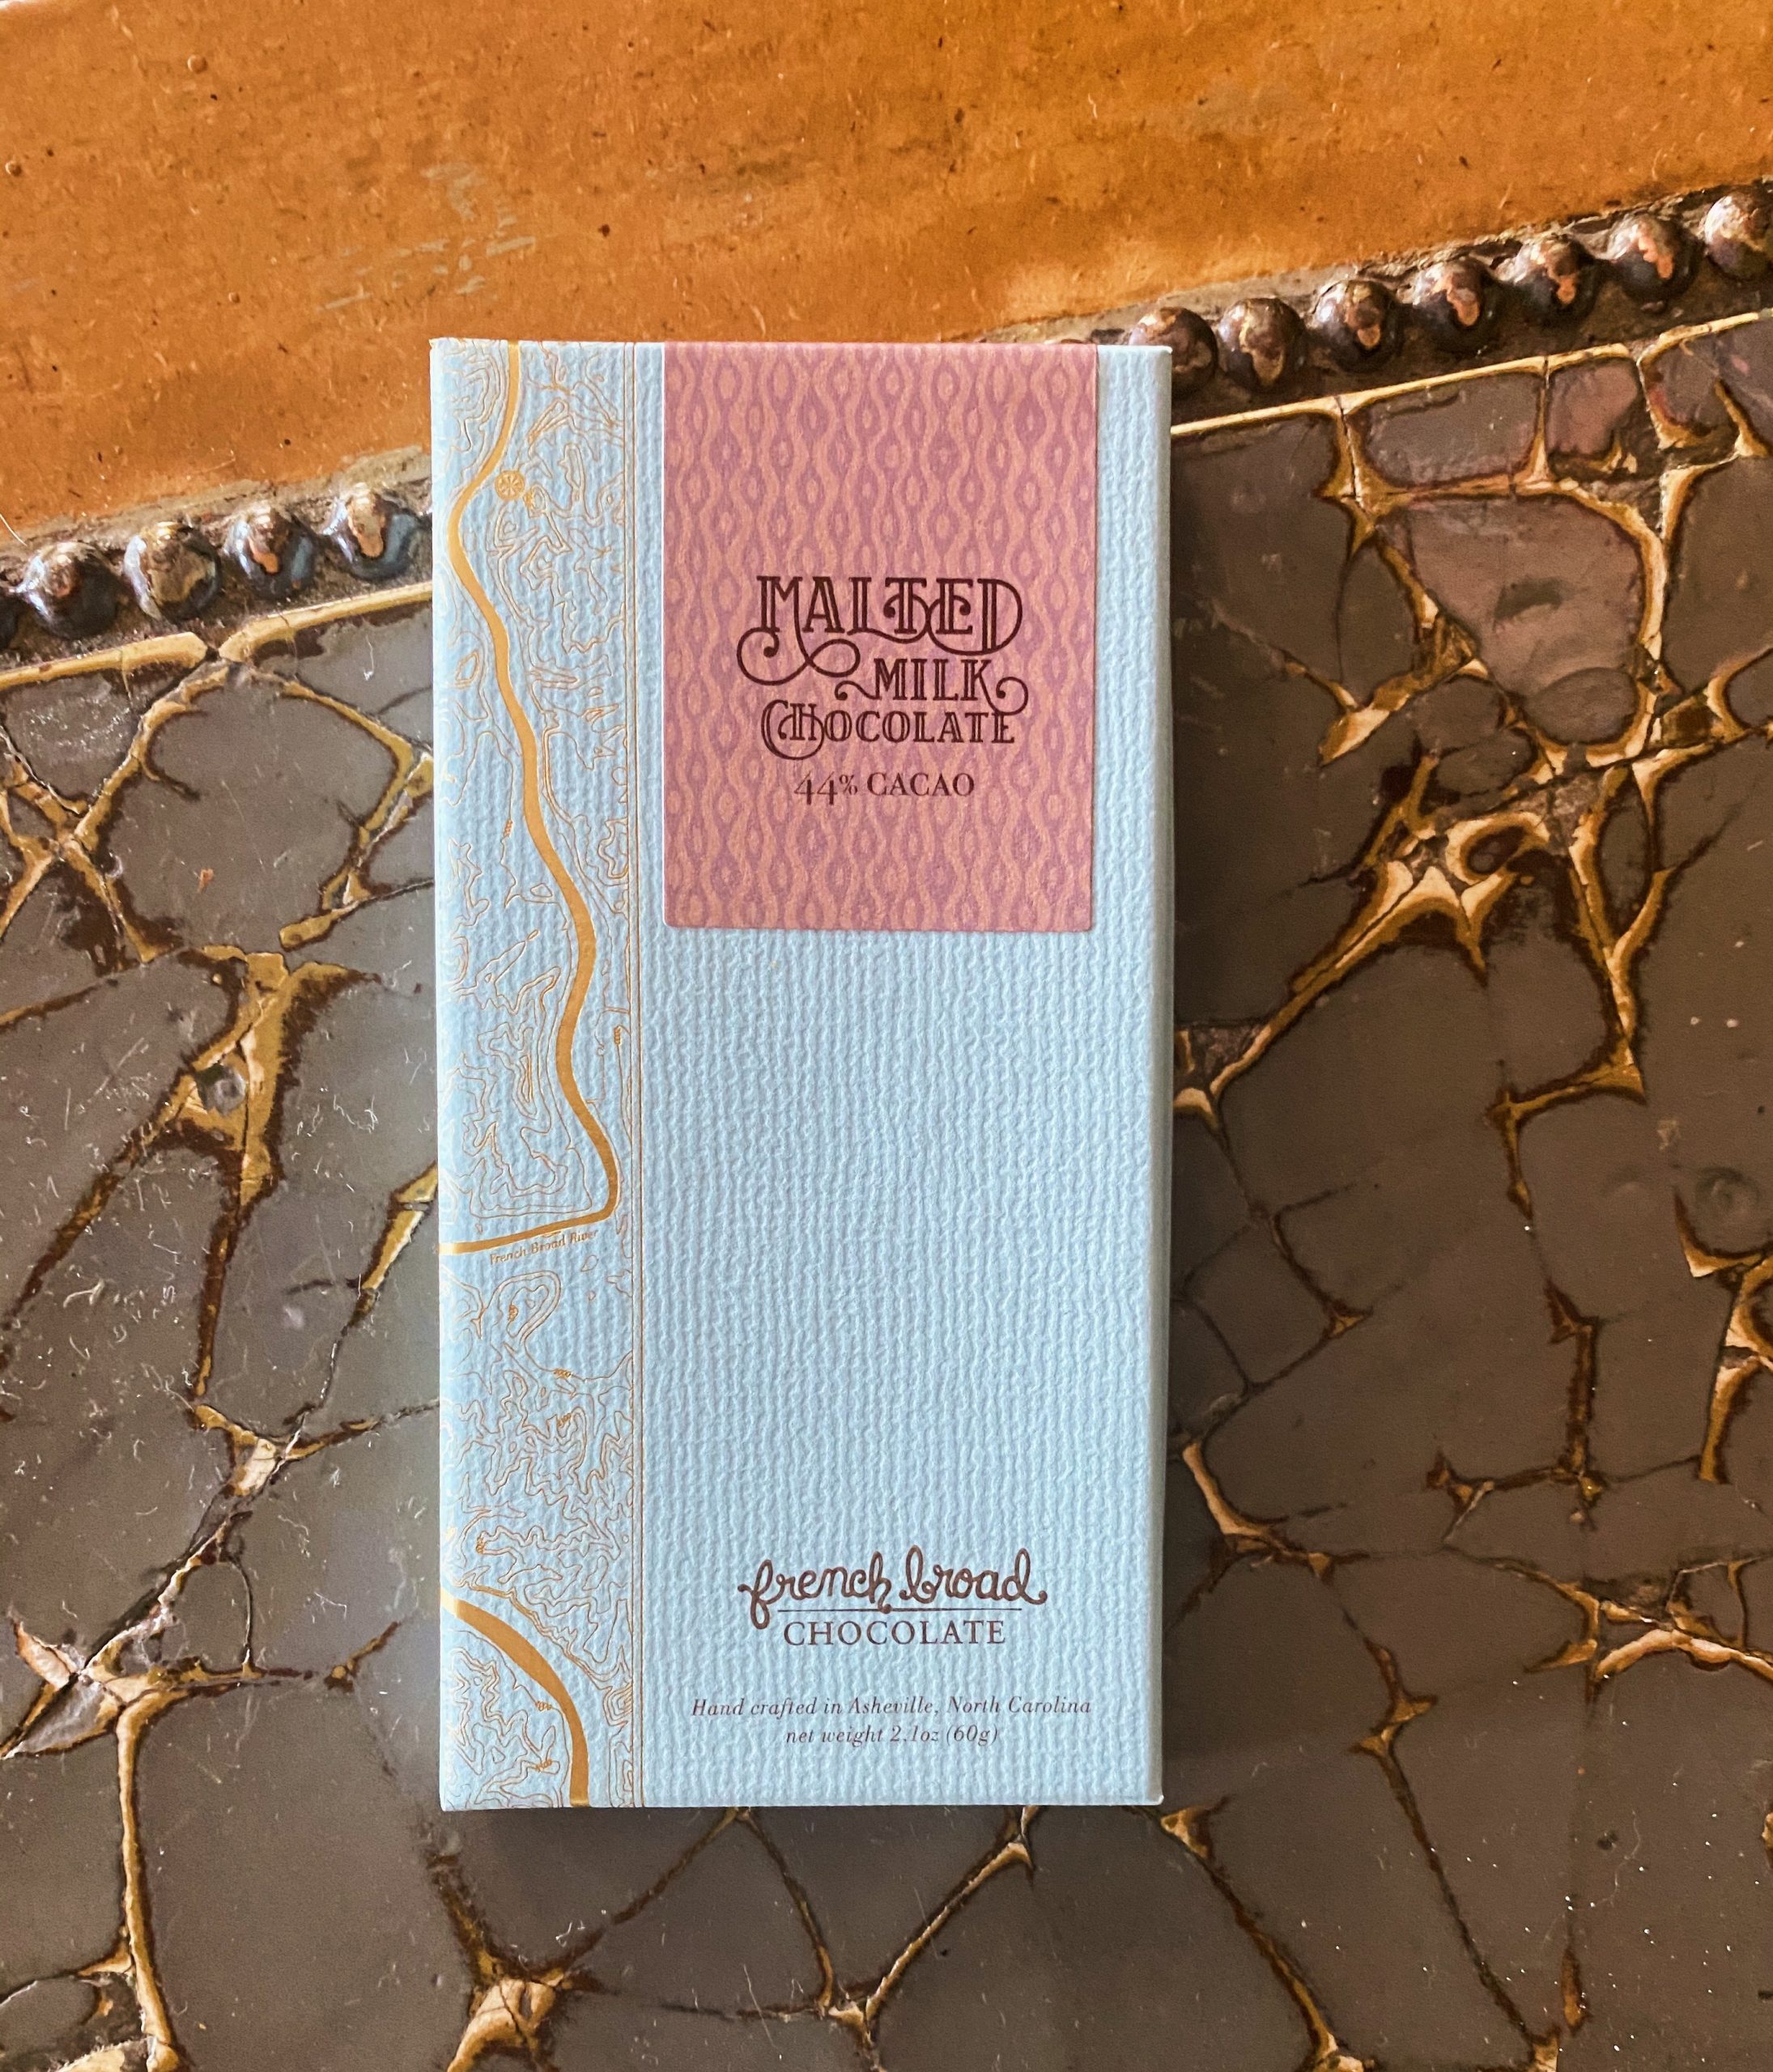 A French Broad Malted Milk chocolate bar at Zingerman's Roadhouse.